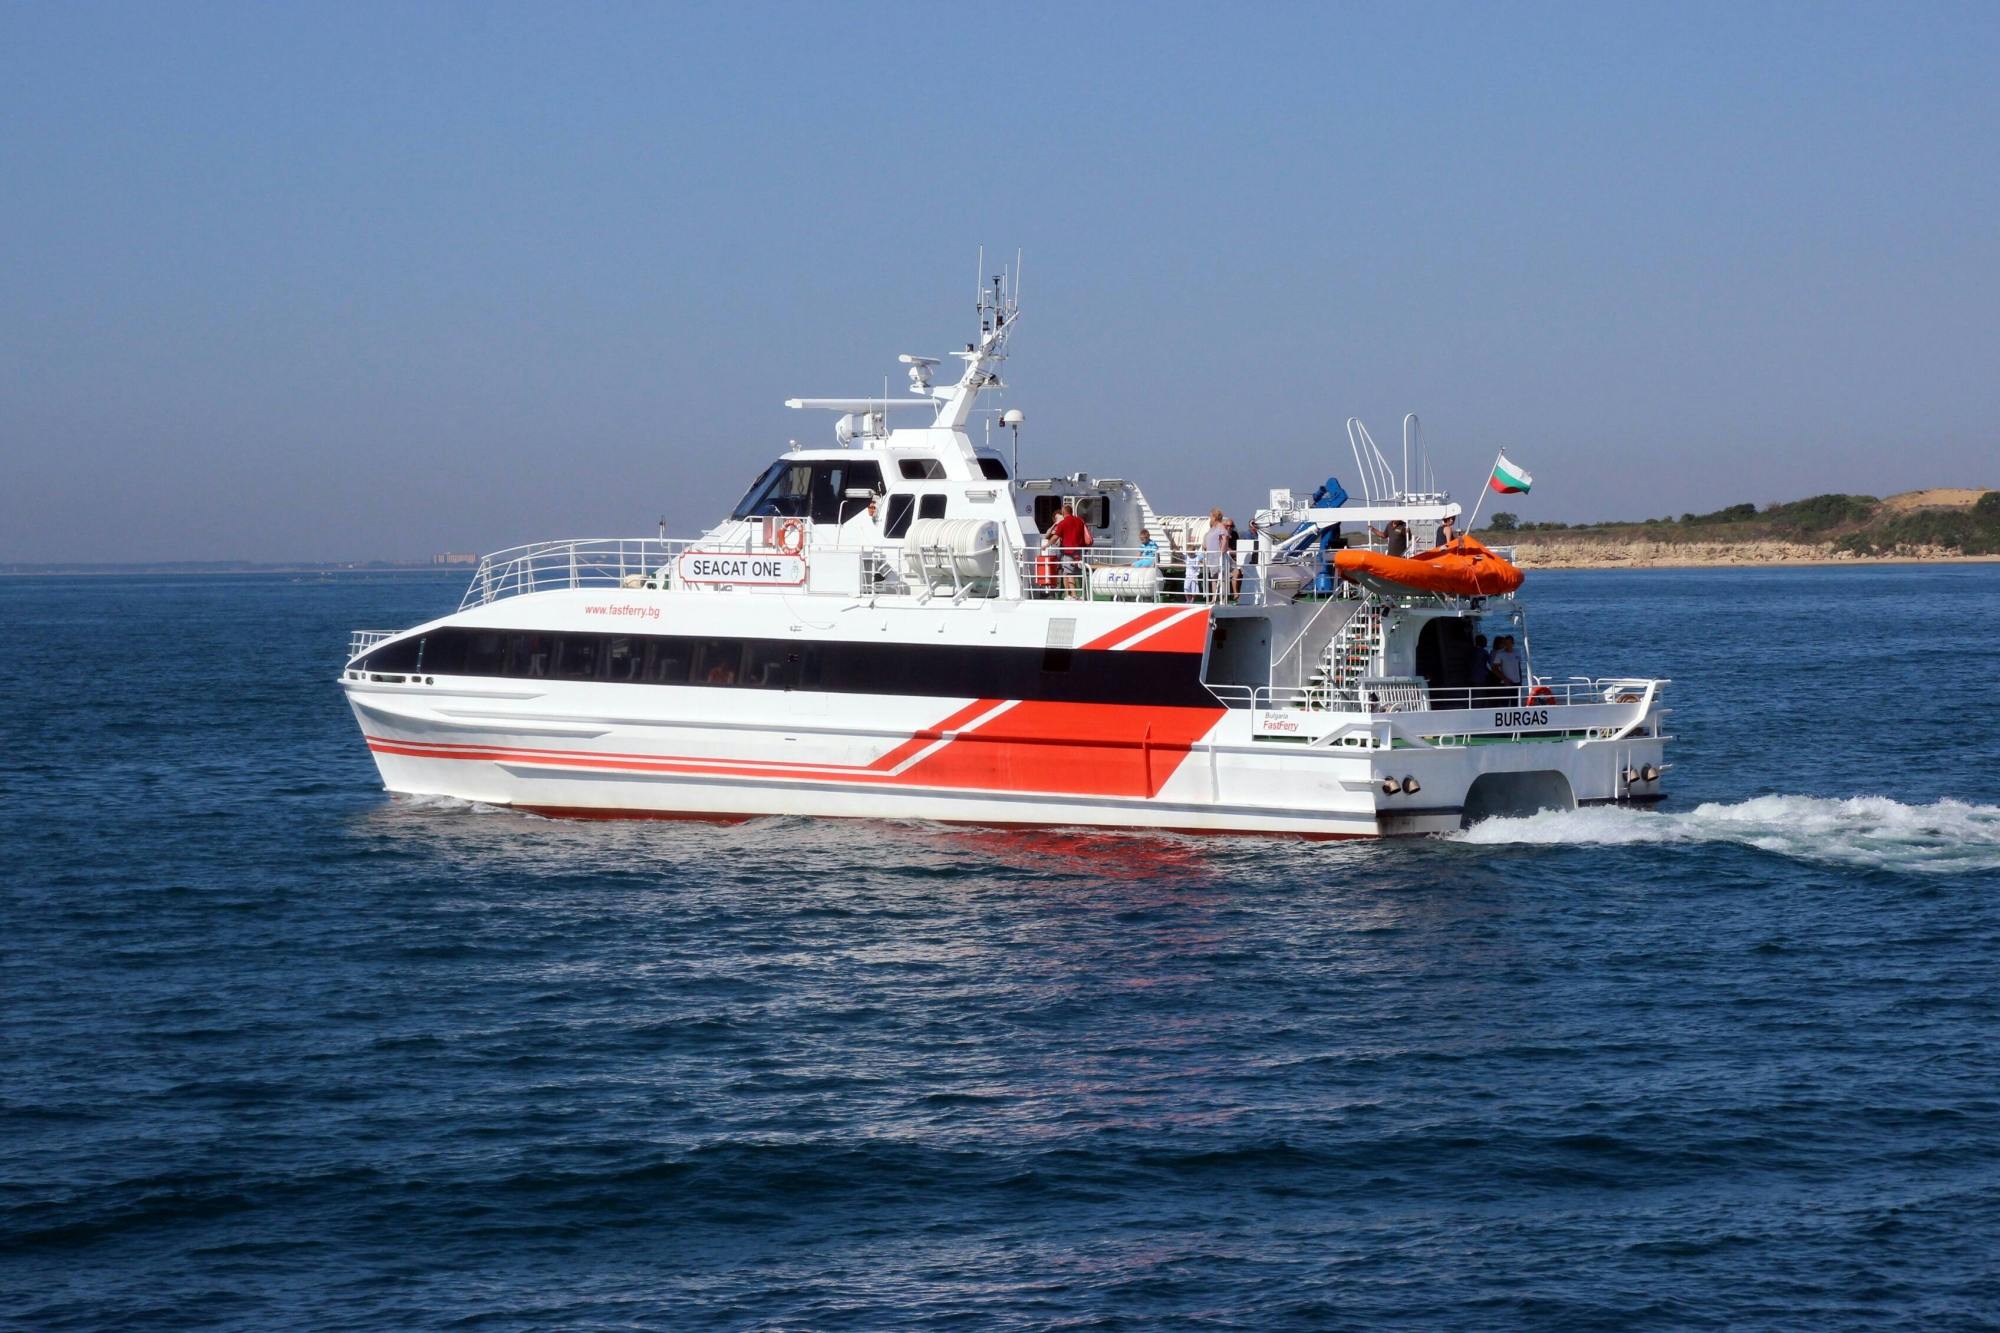 Sozopol Guided Tour by Fast Ferry